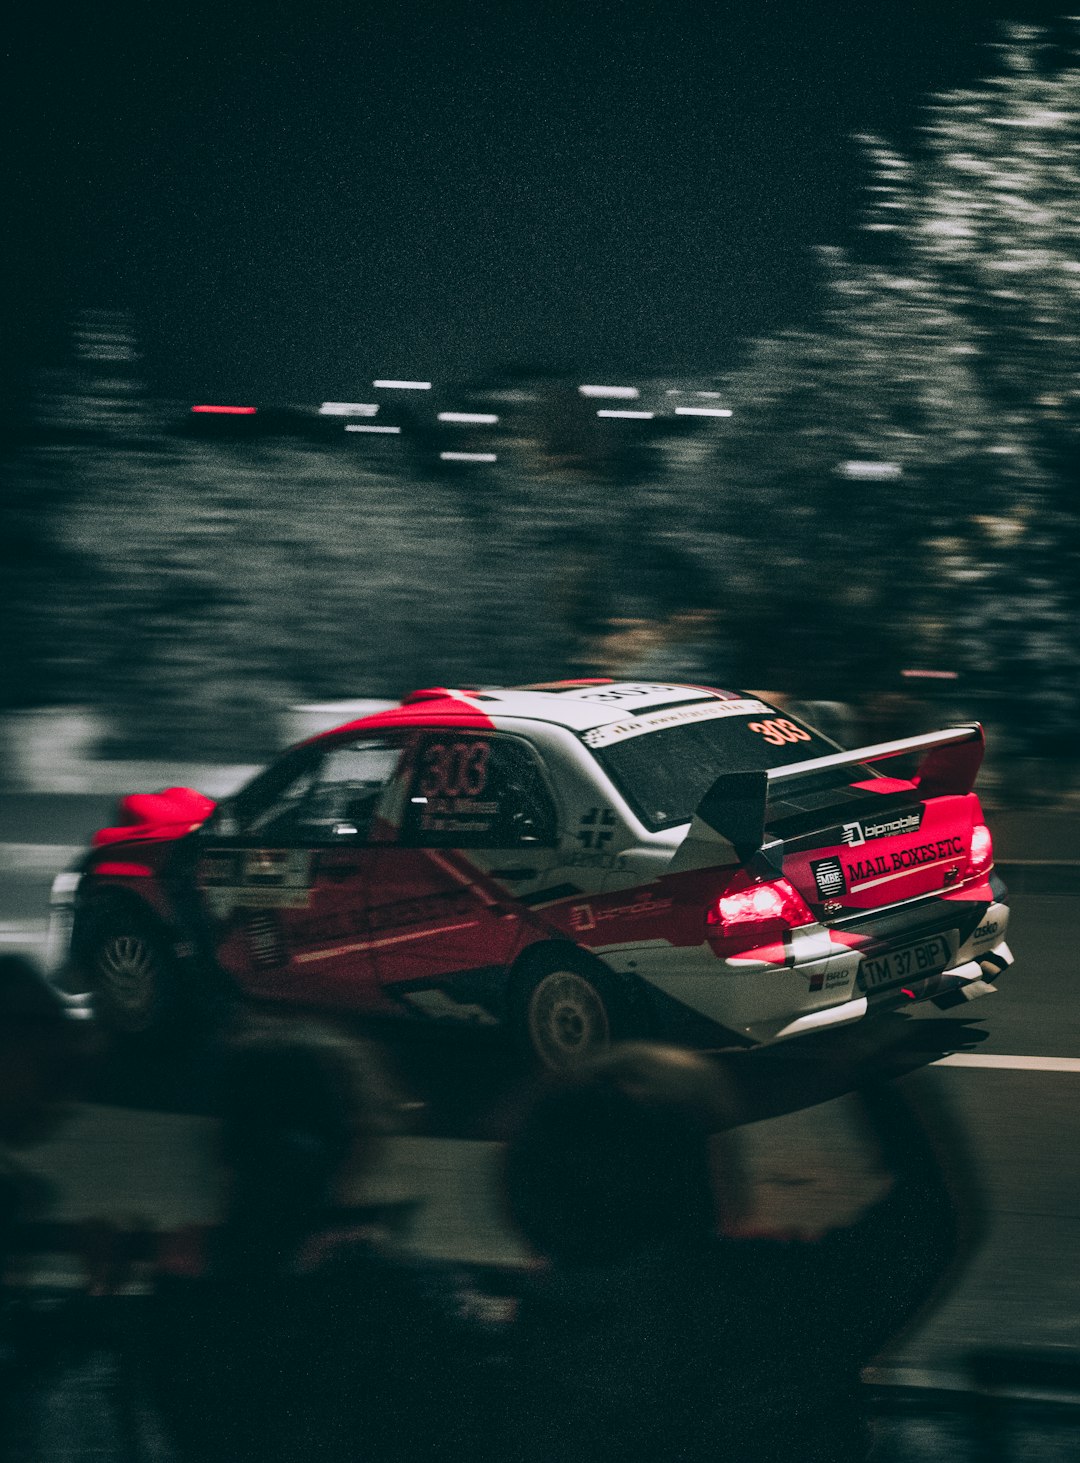 red and white racing car on road during night time